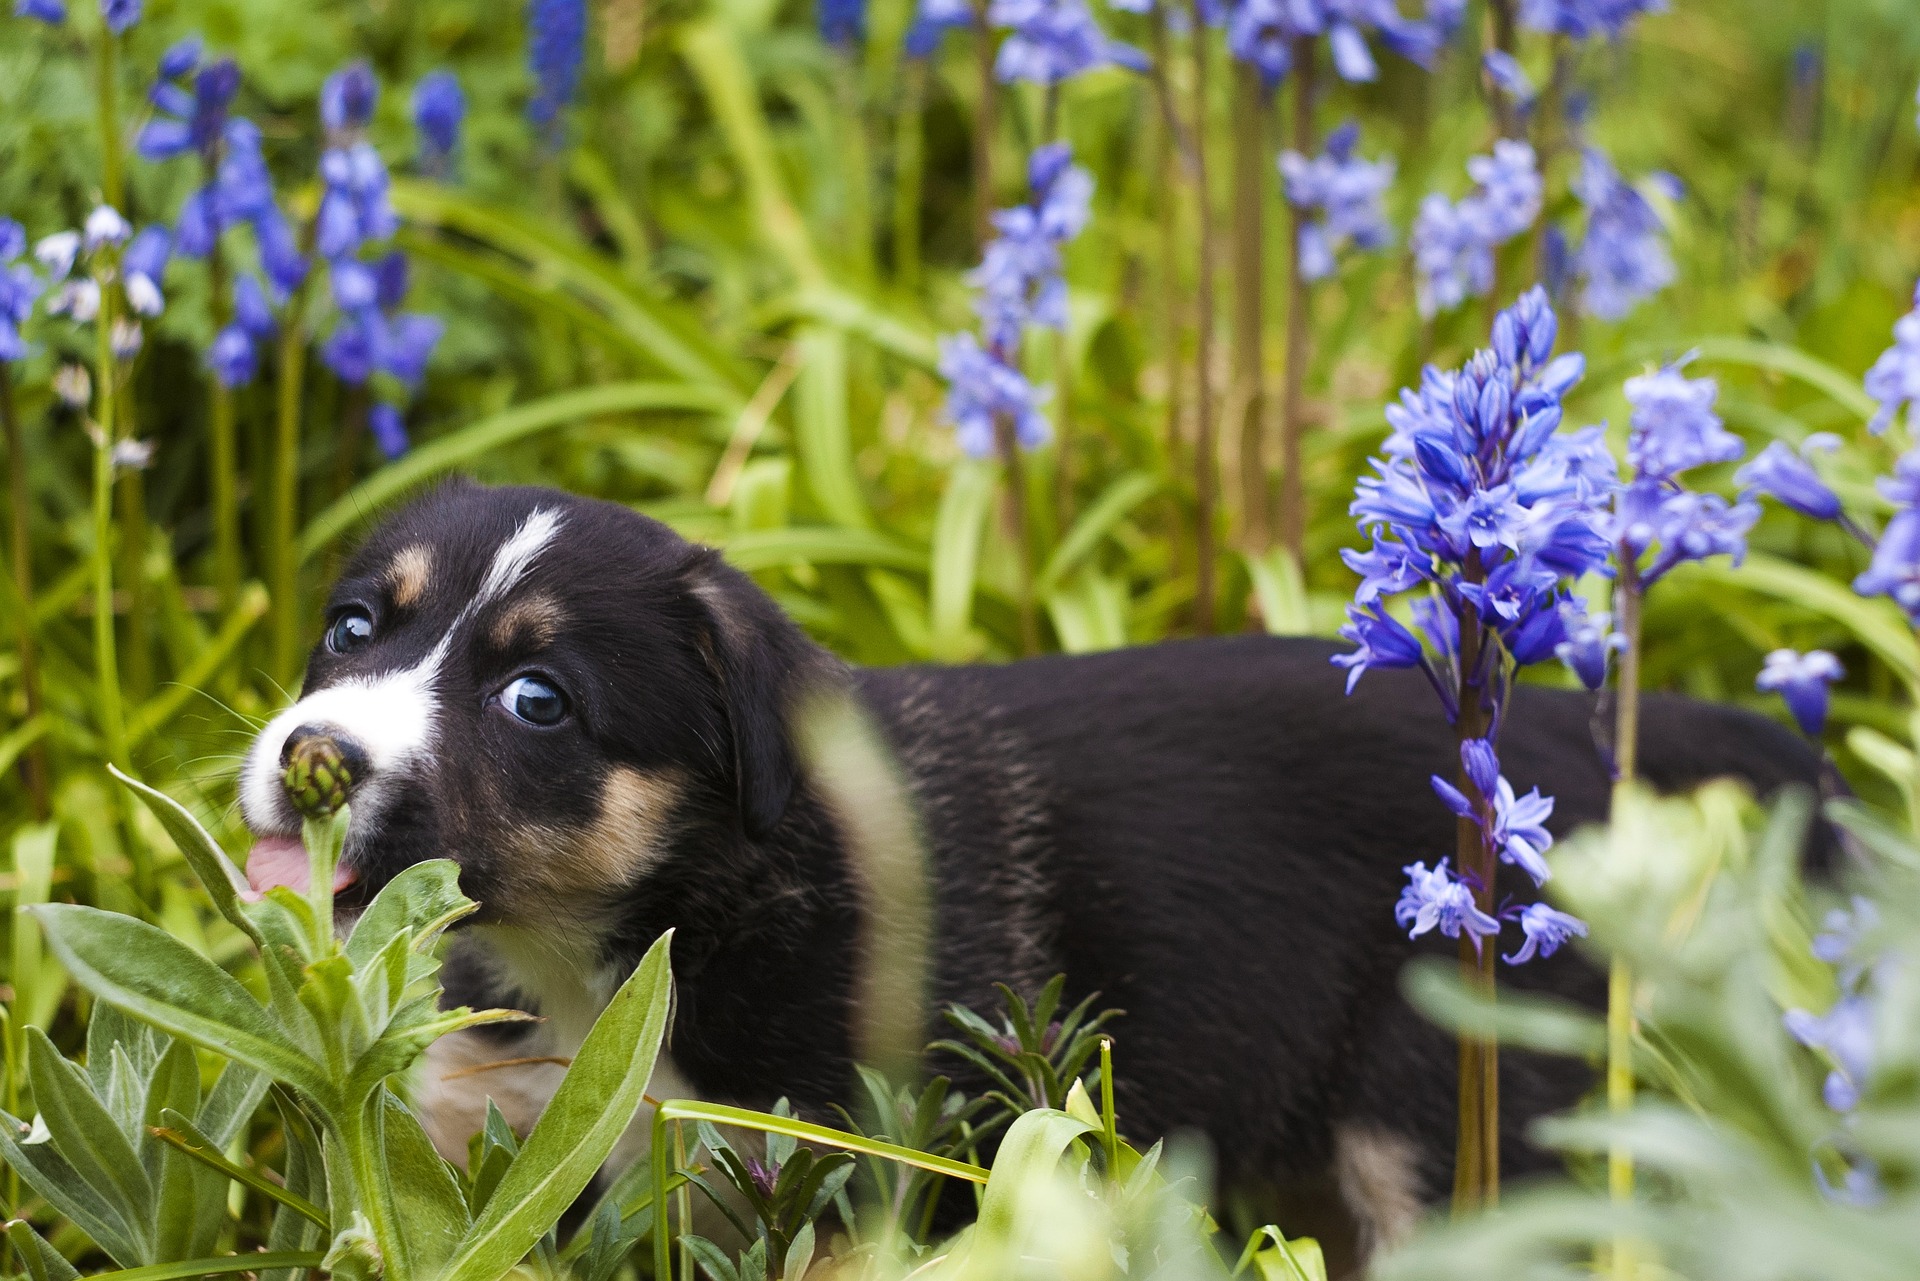 Puppy in a sensory garden for dogs